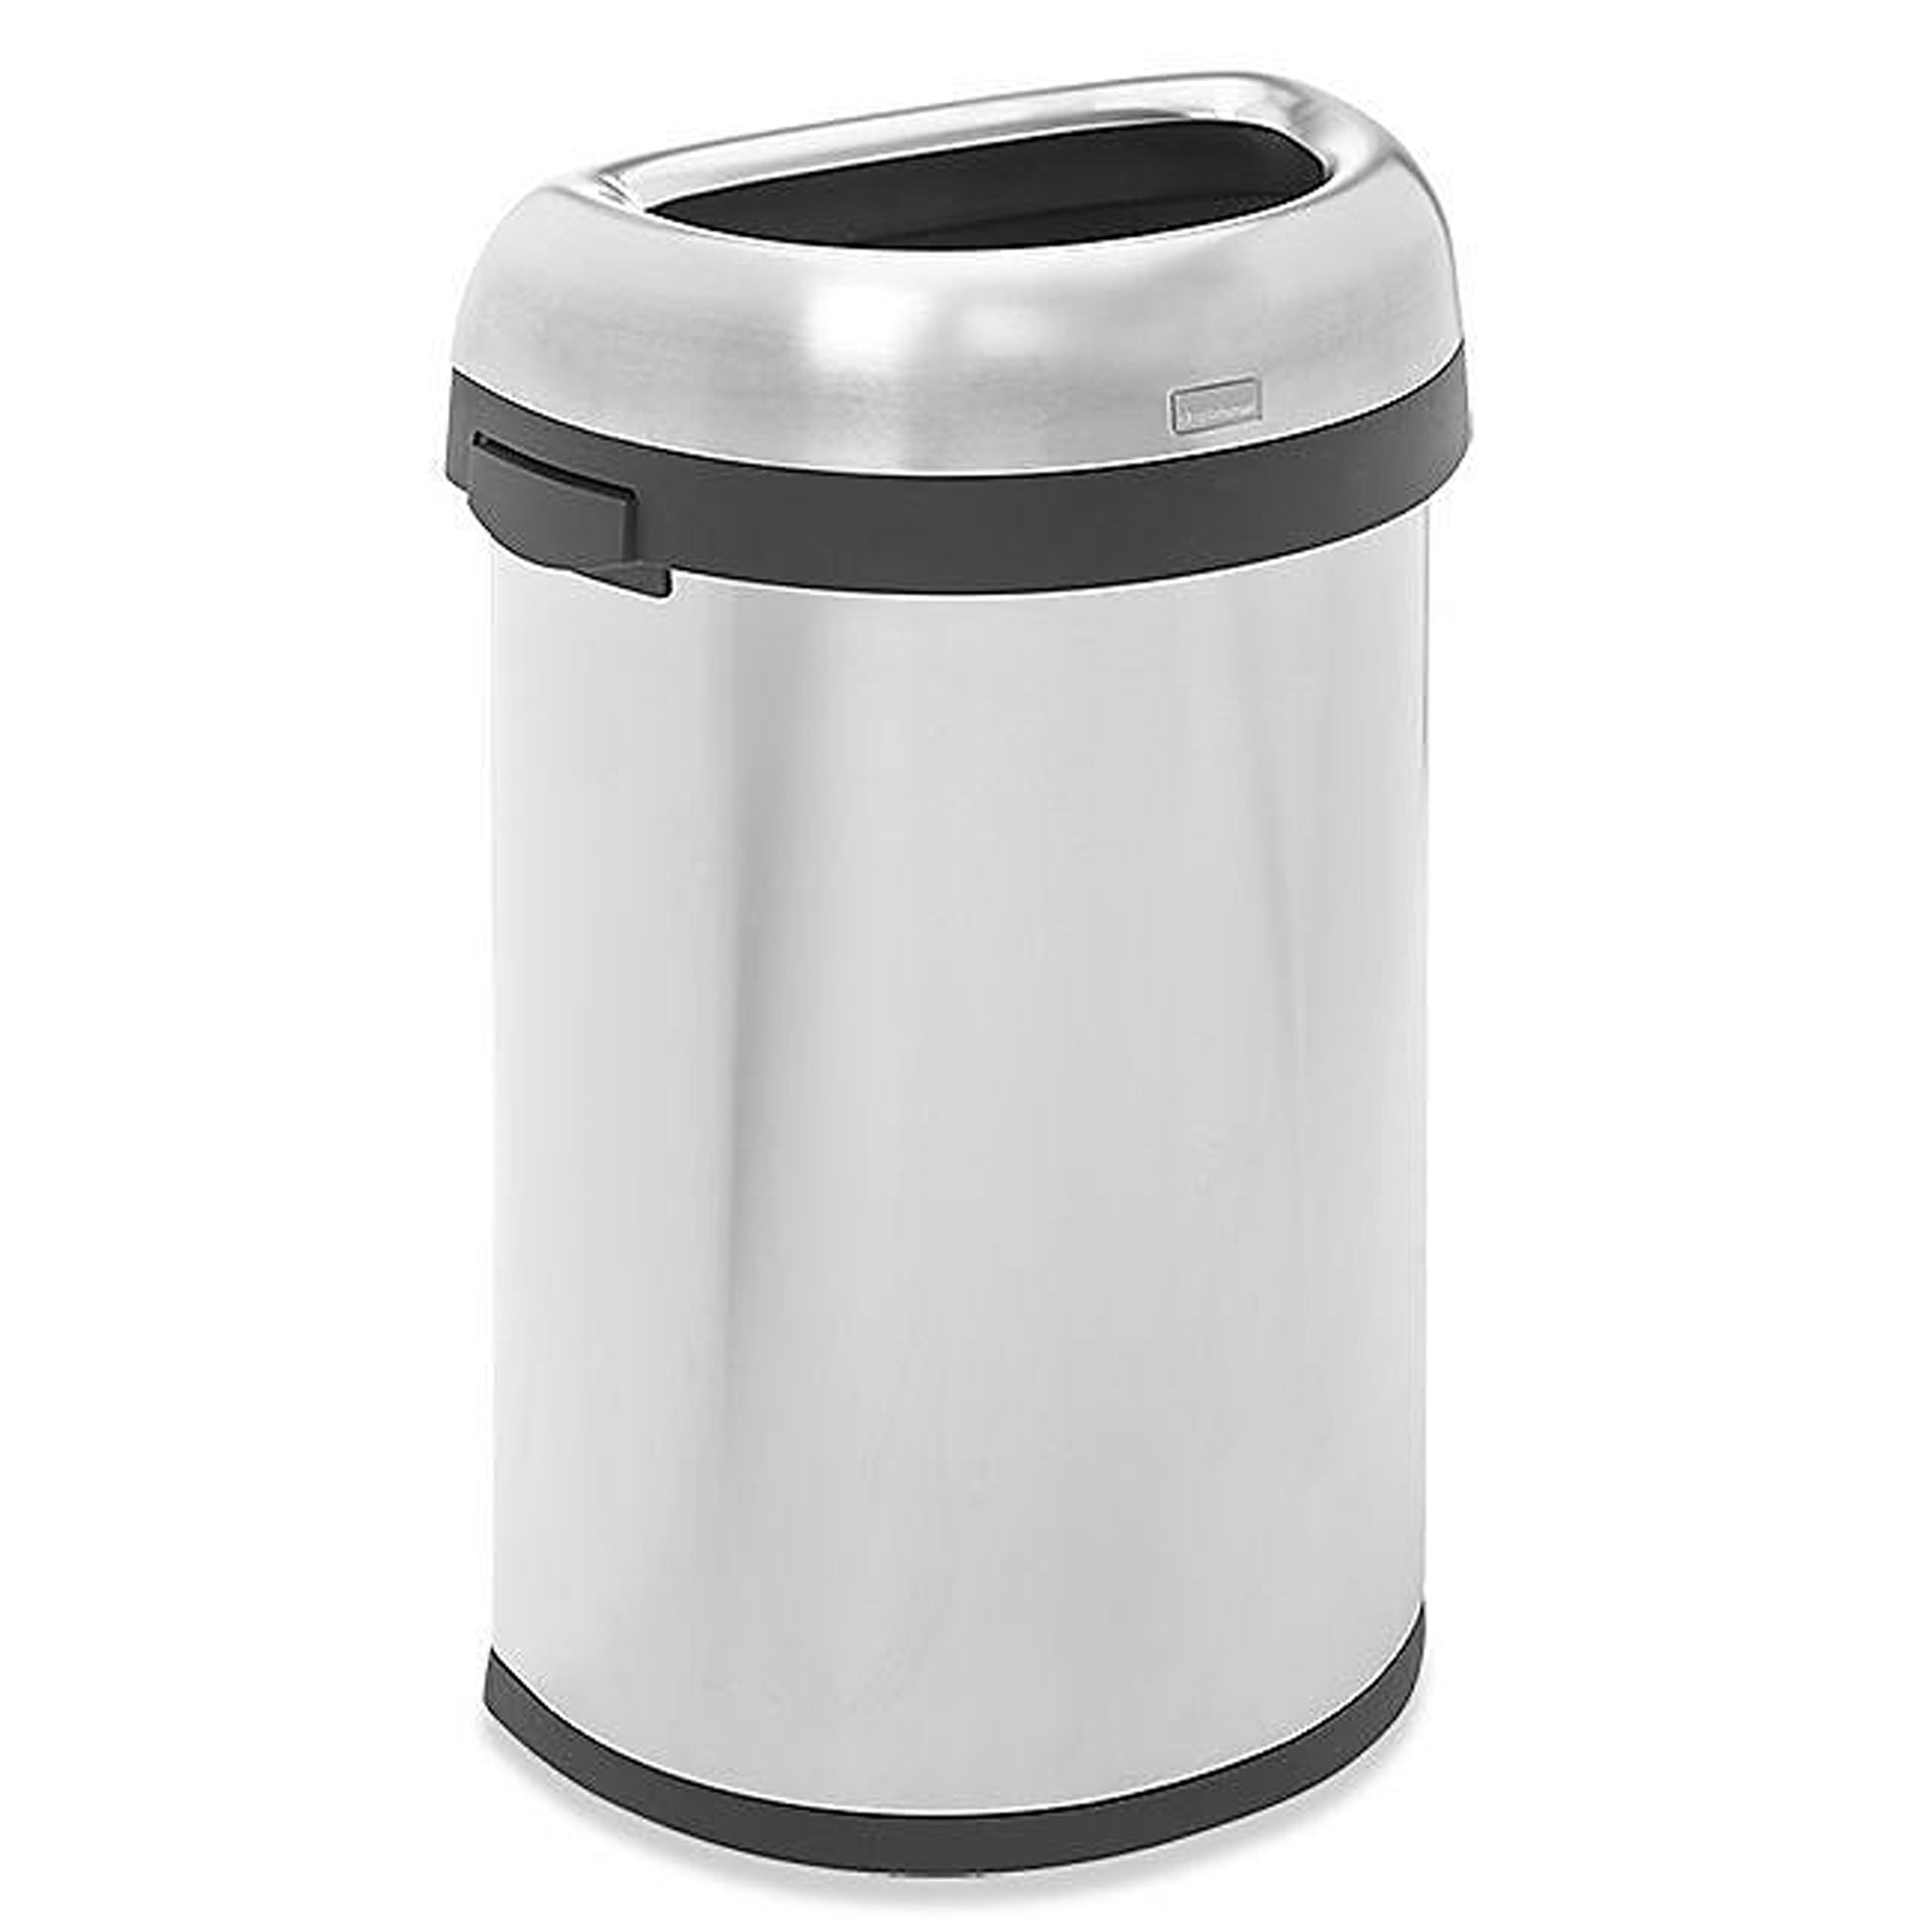 Stainless Steel Trash Can w/ Wide Open Top with black rim